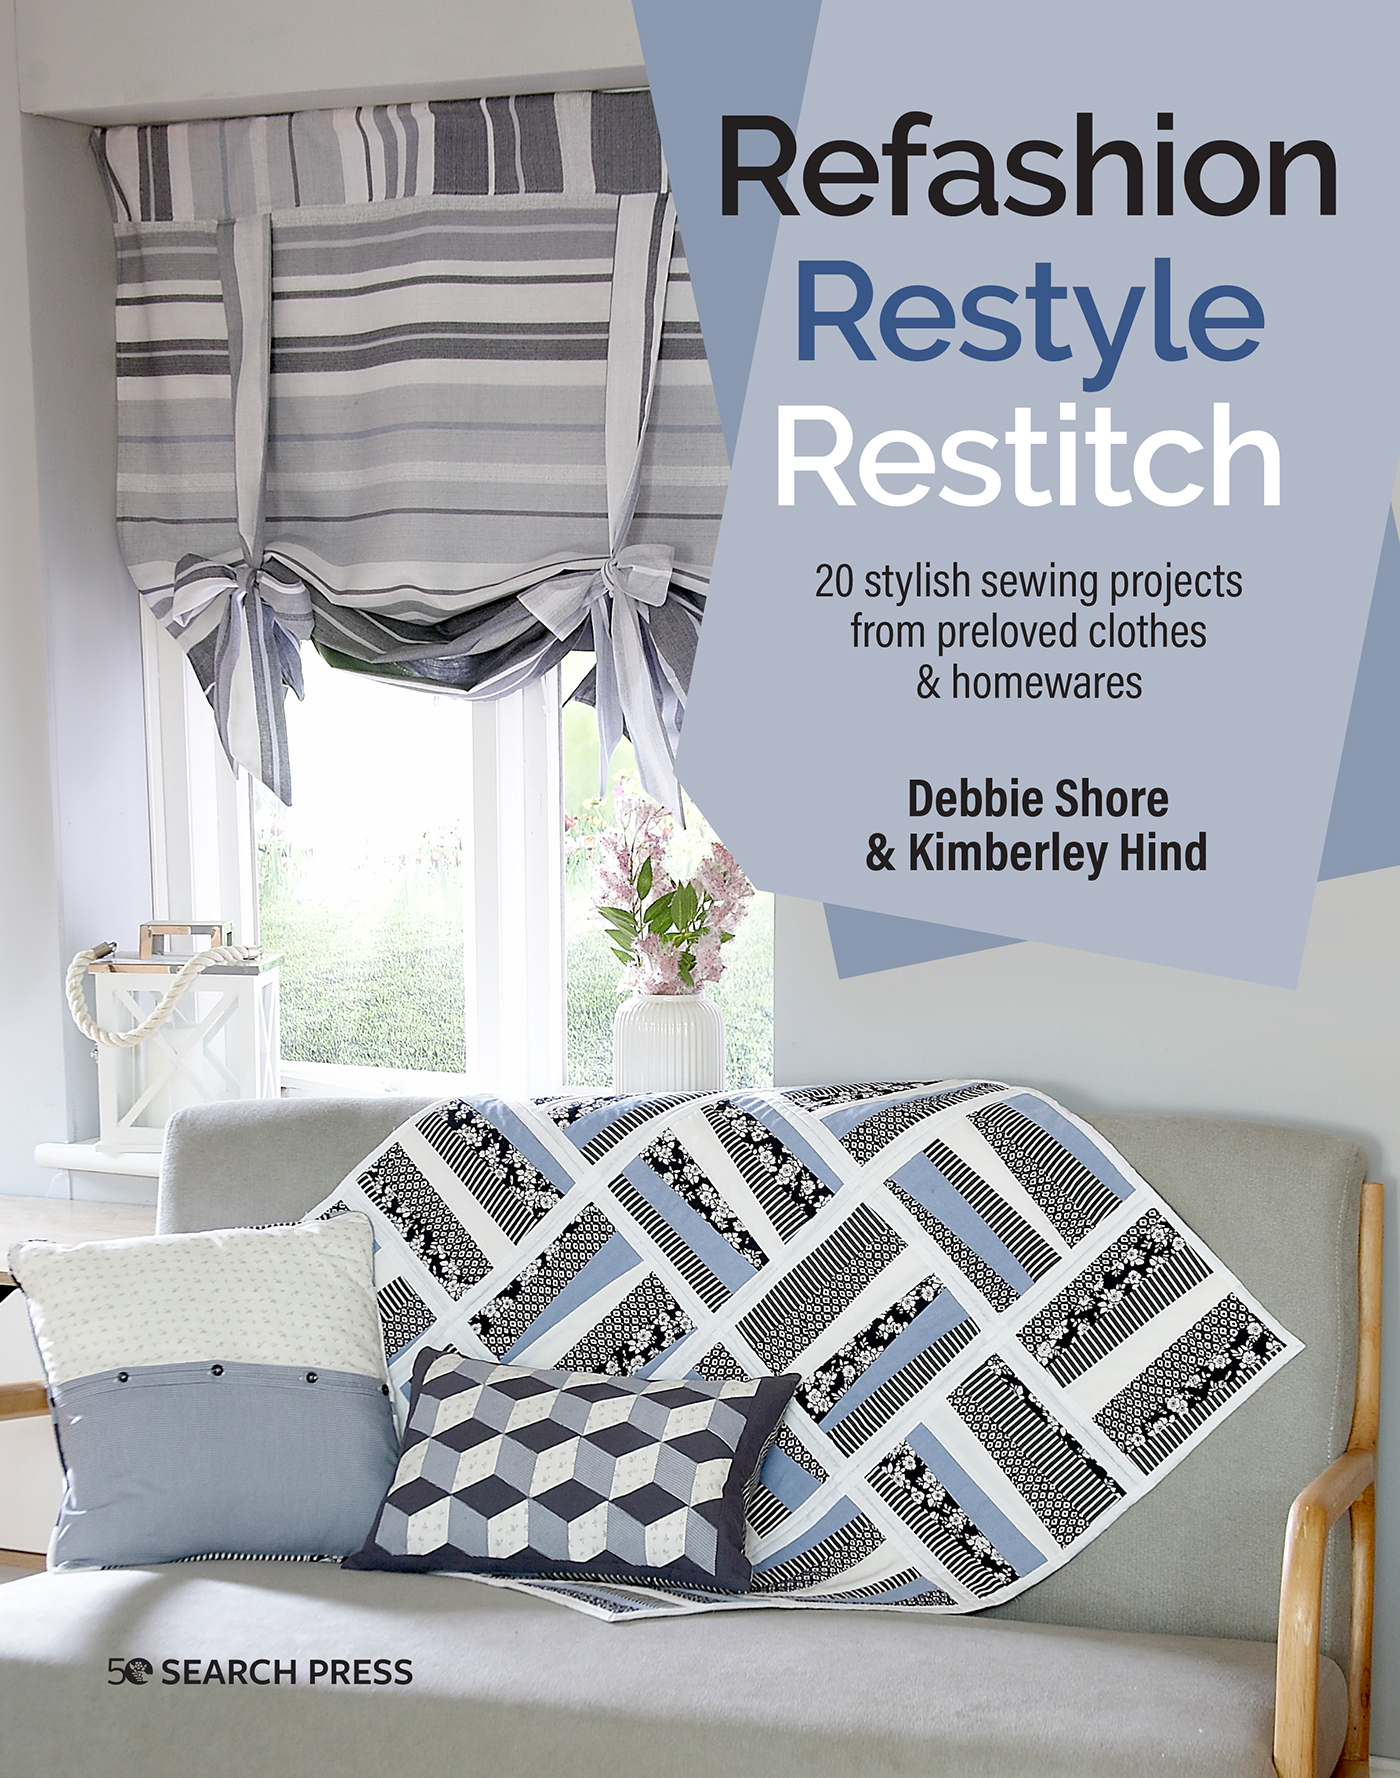 PRE ORDER Refashion Restyle Restitch Book By Debbie Shore and Kimberley Hind